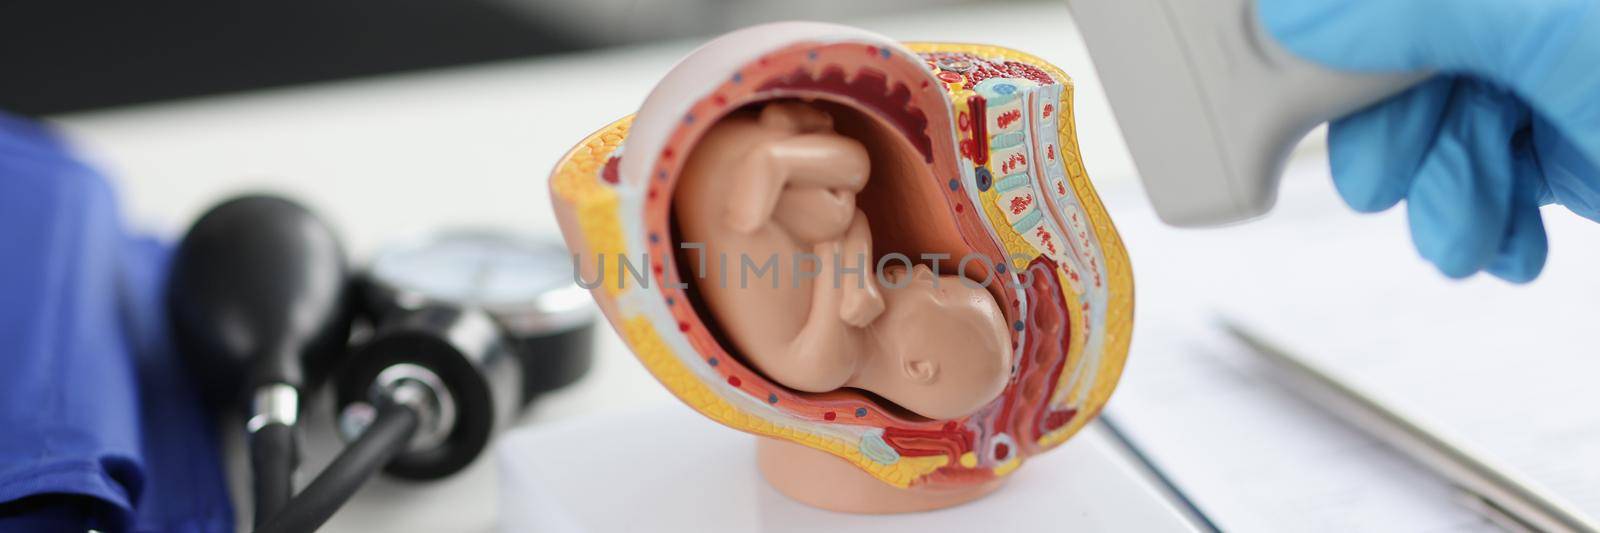 Doctor holding transducer for ultrasound examination in front of artificial model of human fetus in uterus closeup. Ultrasound of fetus examination of pregnant women concept